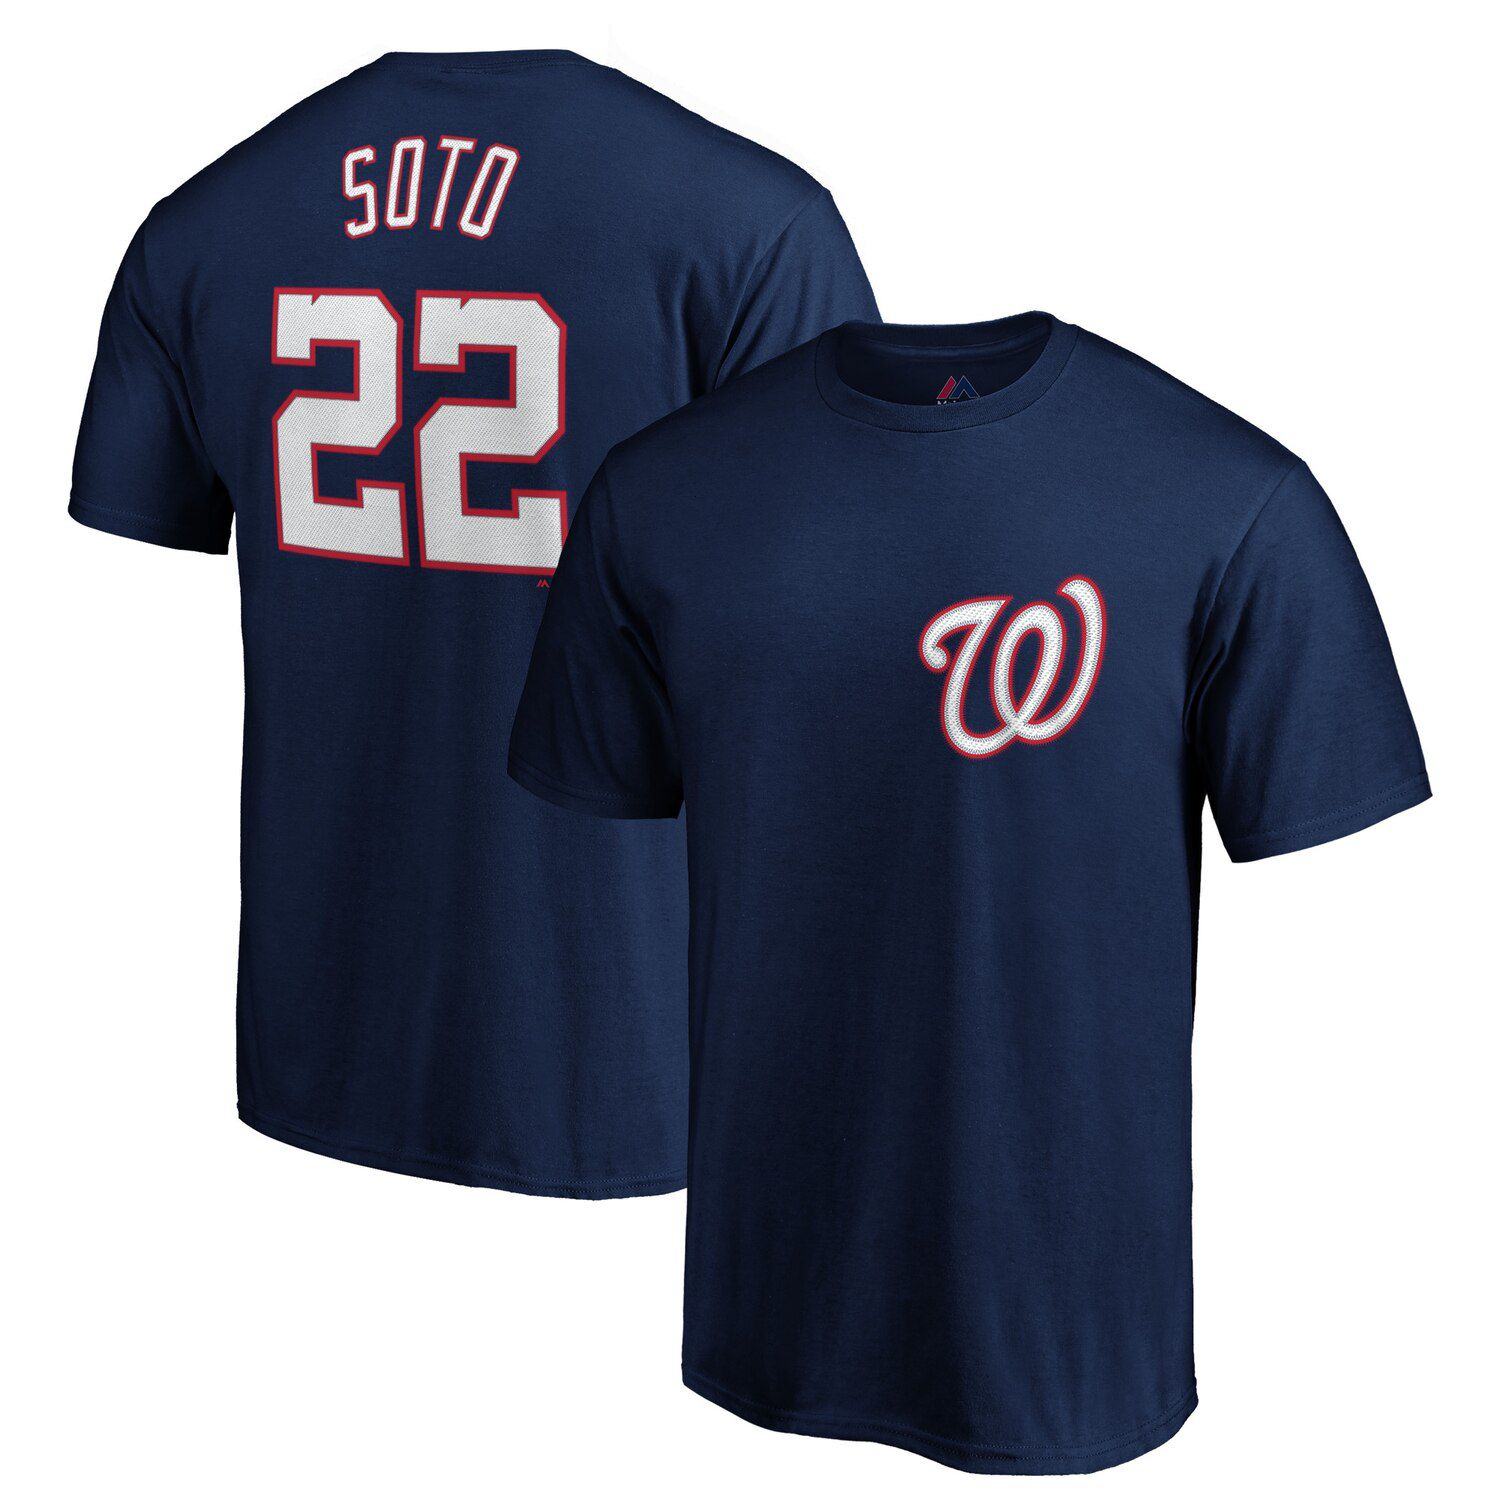 nationals jersey numbers